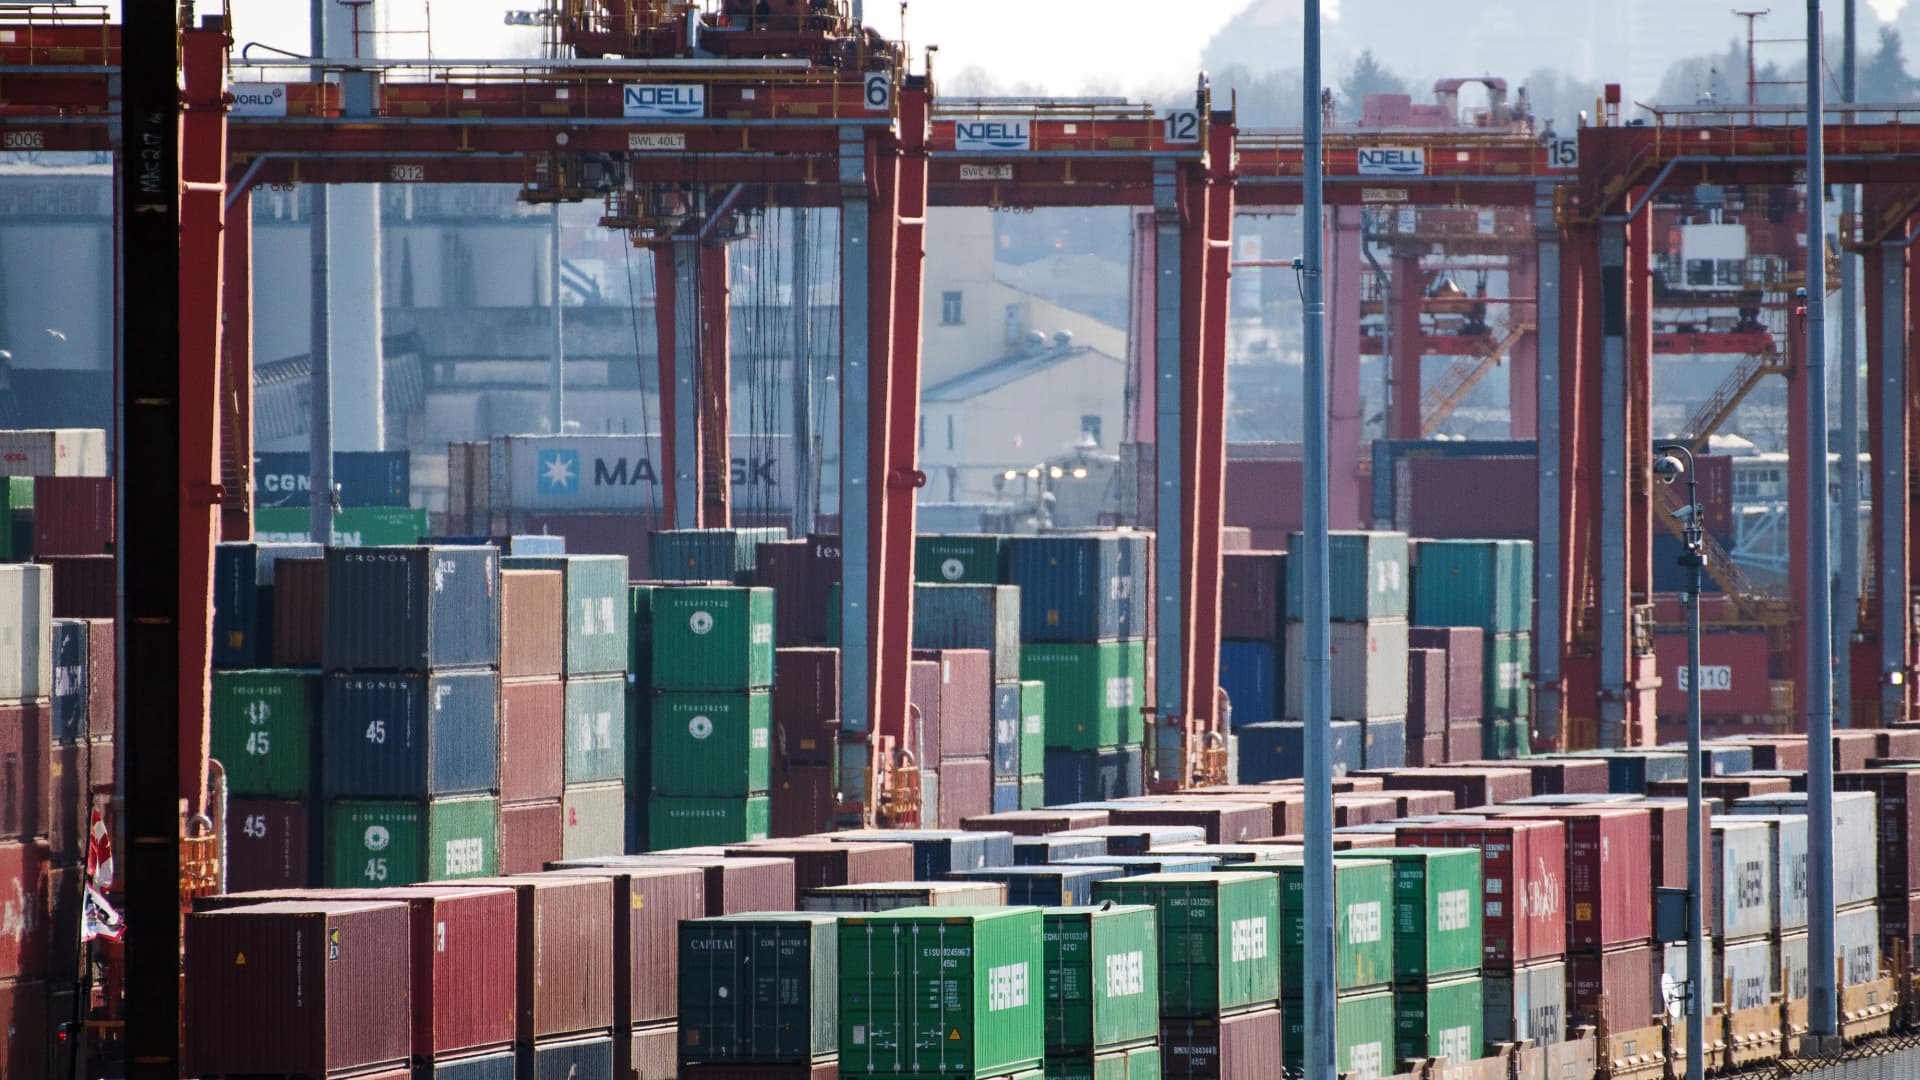 Dock workers at key Canadian ports reject labor deal, creating further trade uncertainty